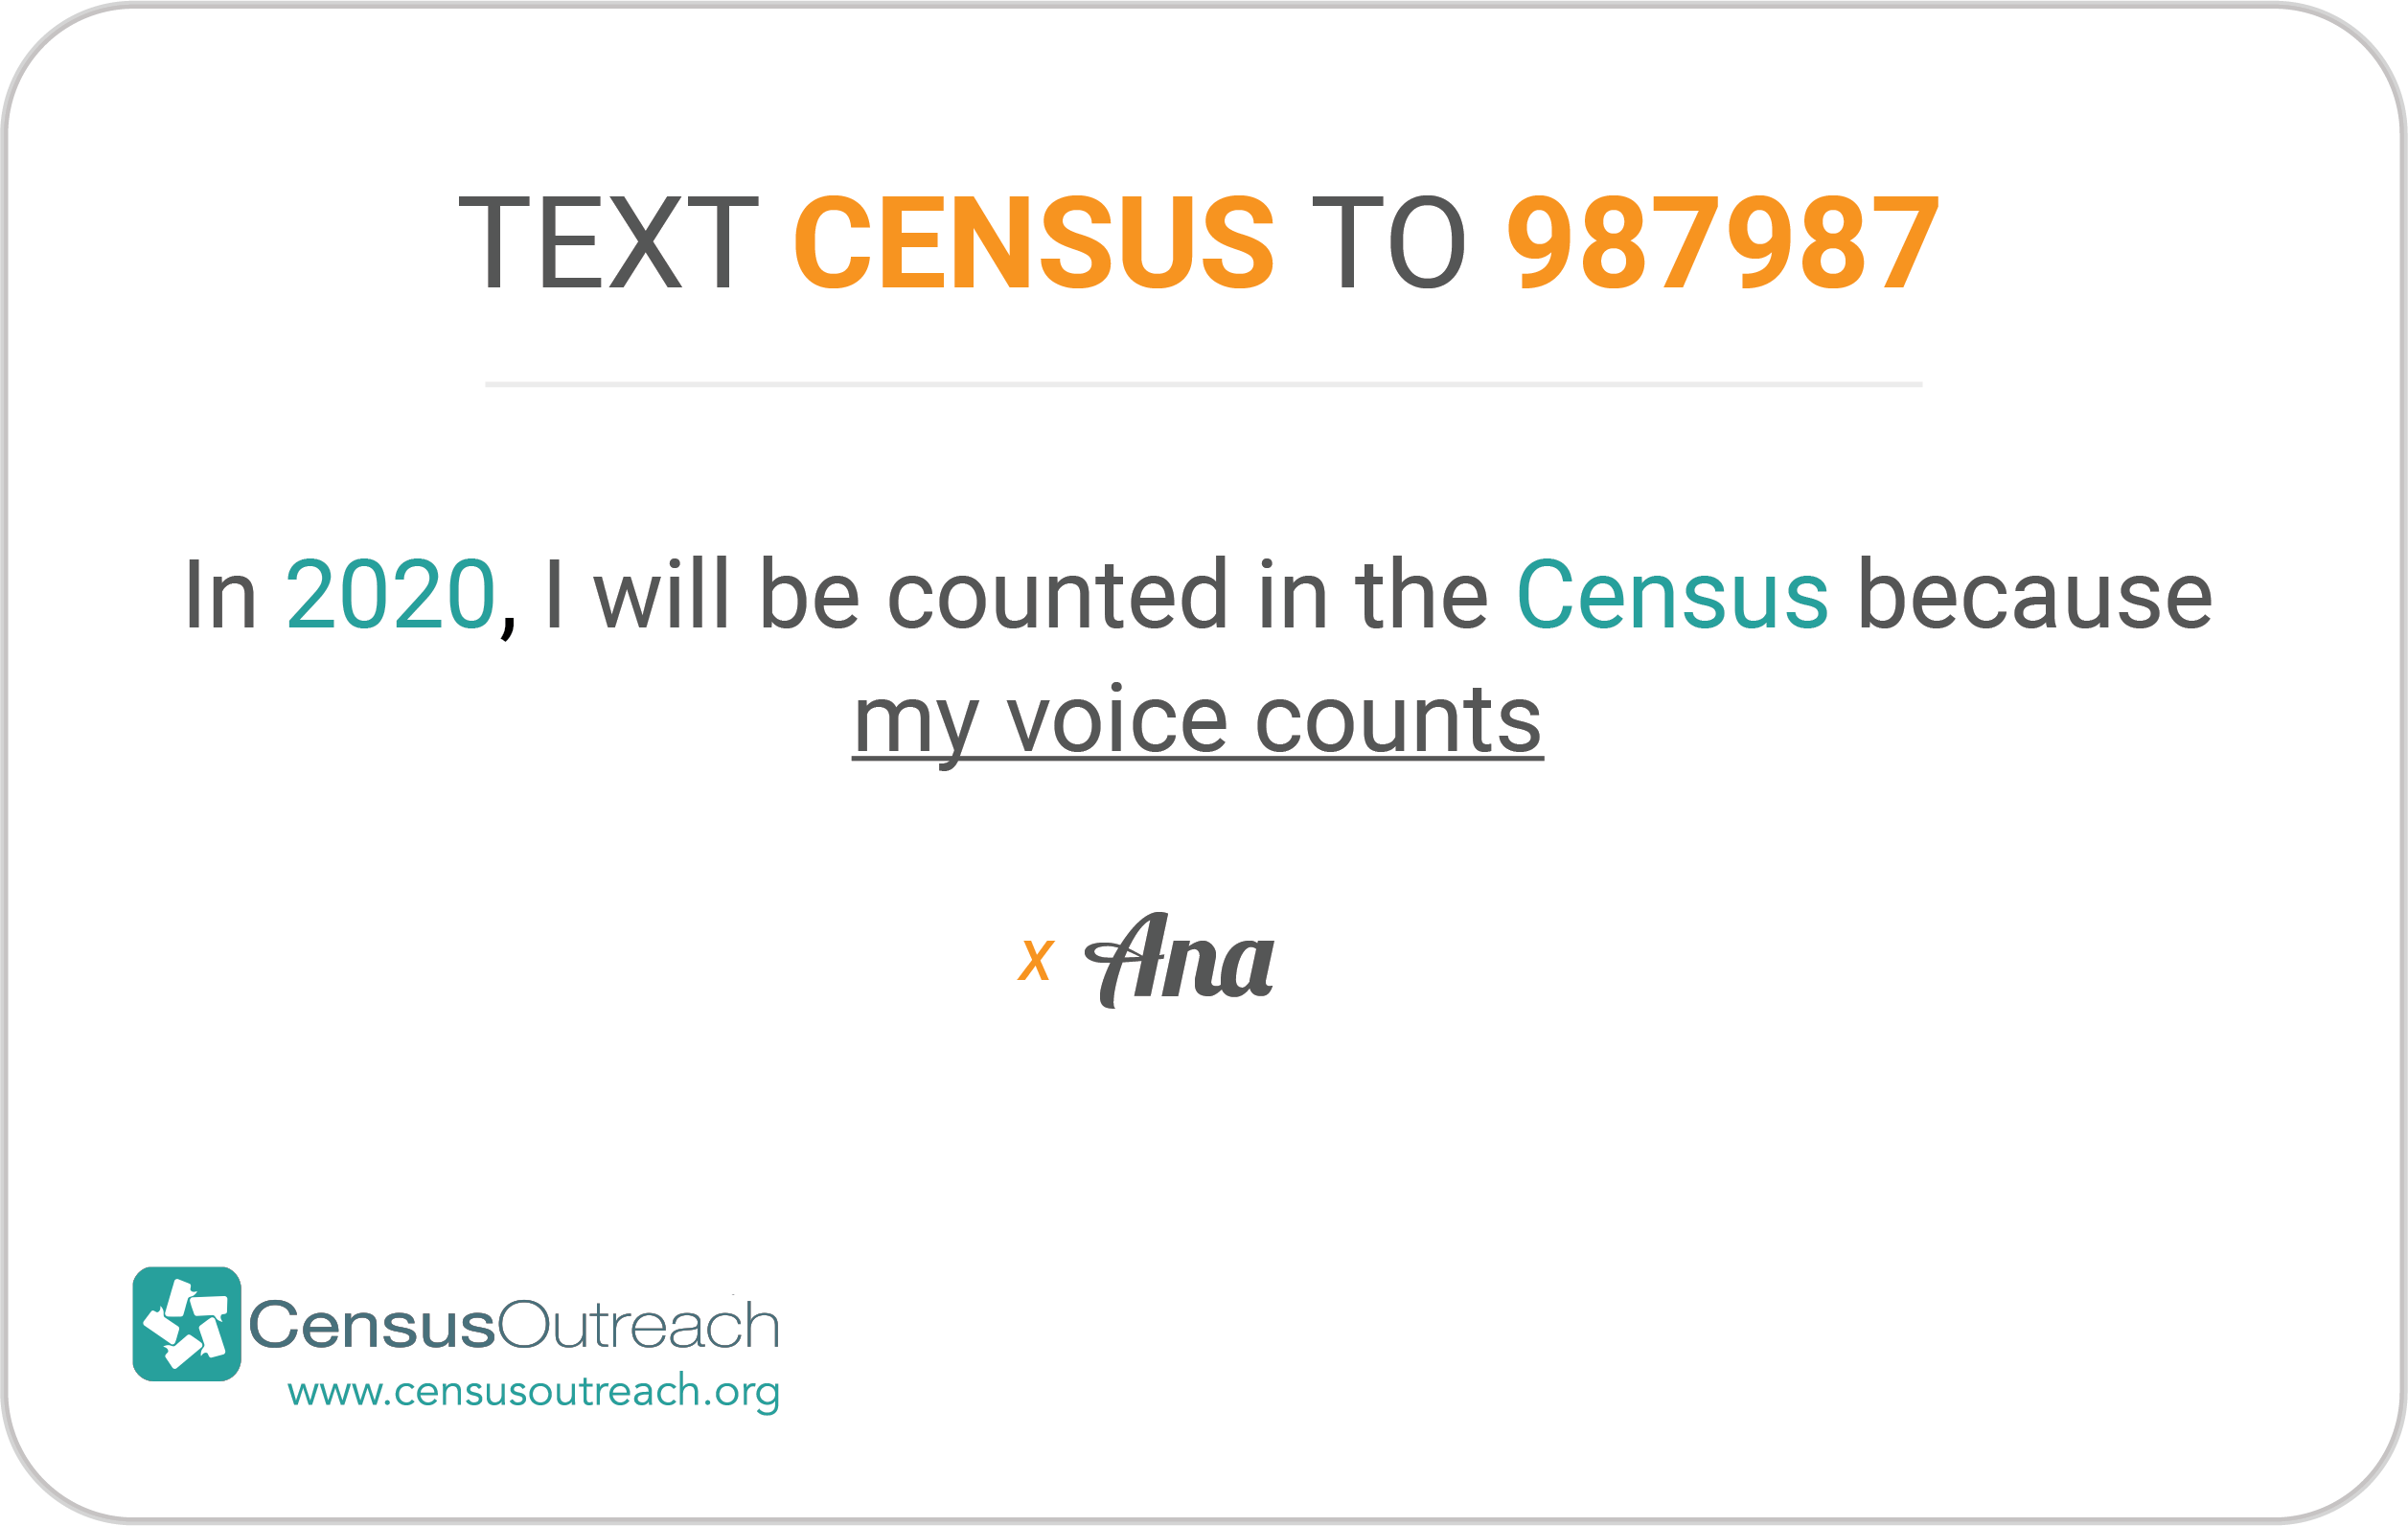 2020 Pledge Card "Text Census to 987987"